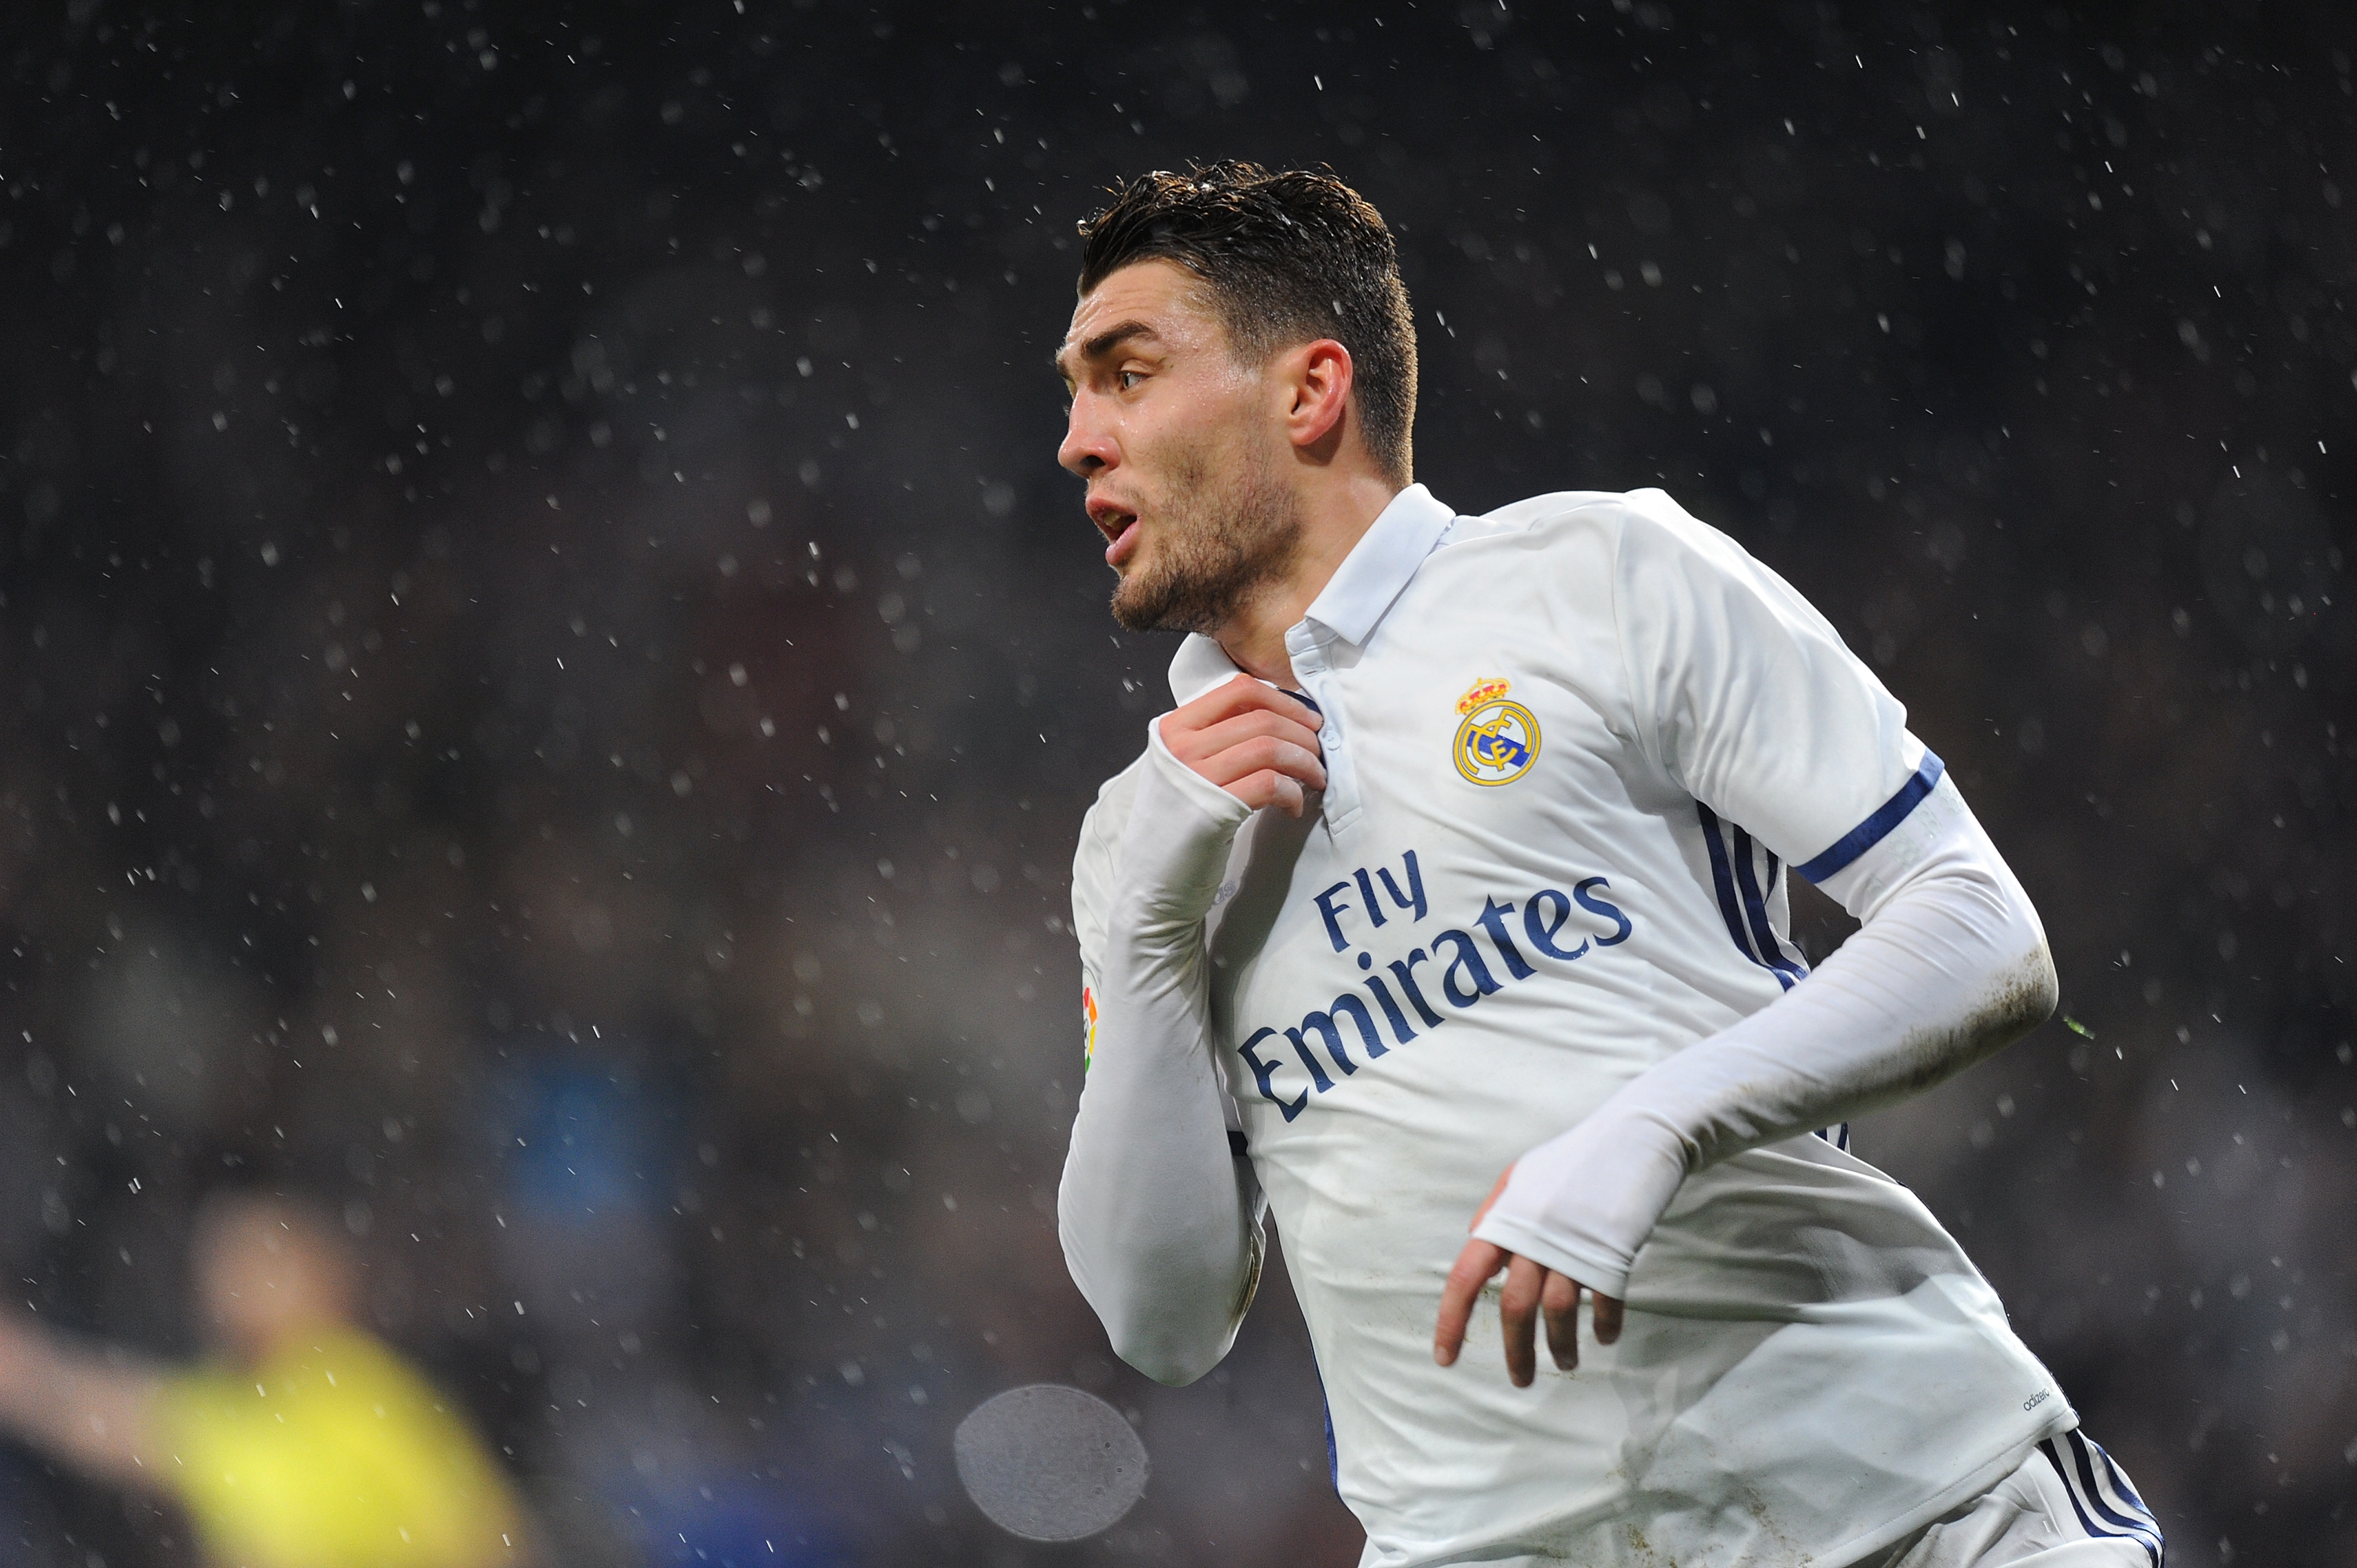 MADRID, SPAIN - JANUARY 29:  Mateo Kovacic of Real Madrid celebrates after scoring Real's 1st during the La Liga match between Real Madrid CF and Real Sociedad de Futbol at the Bernabeu on January 29, 2017 in Madrid, Spain.  (Photo by Denis Doyle/Getty Images)